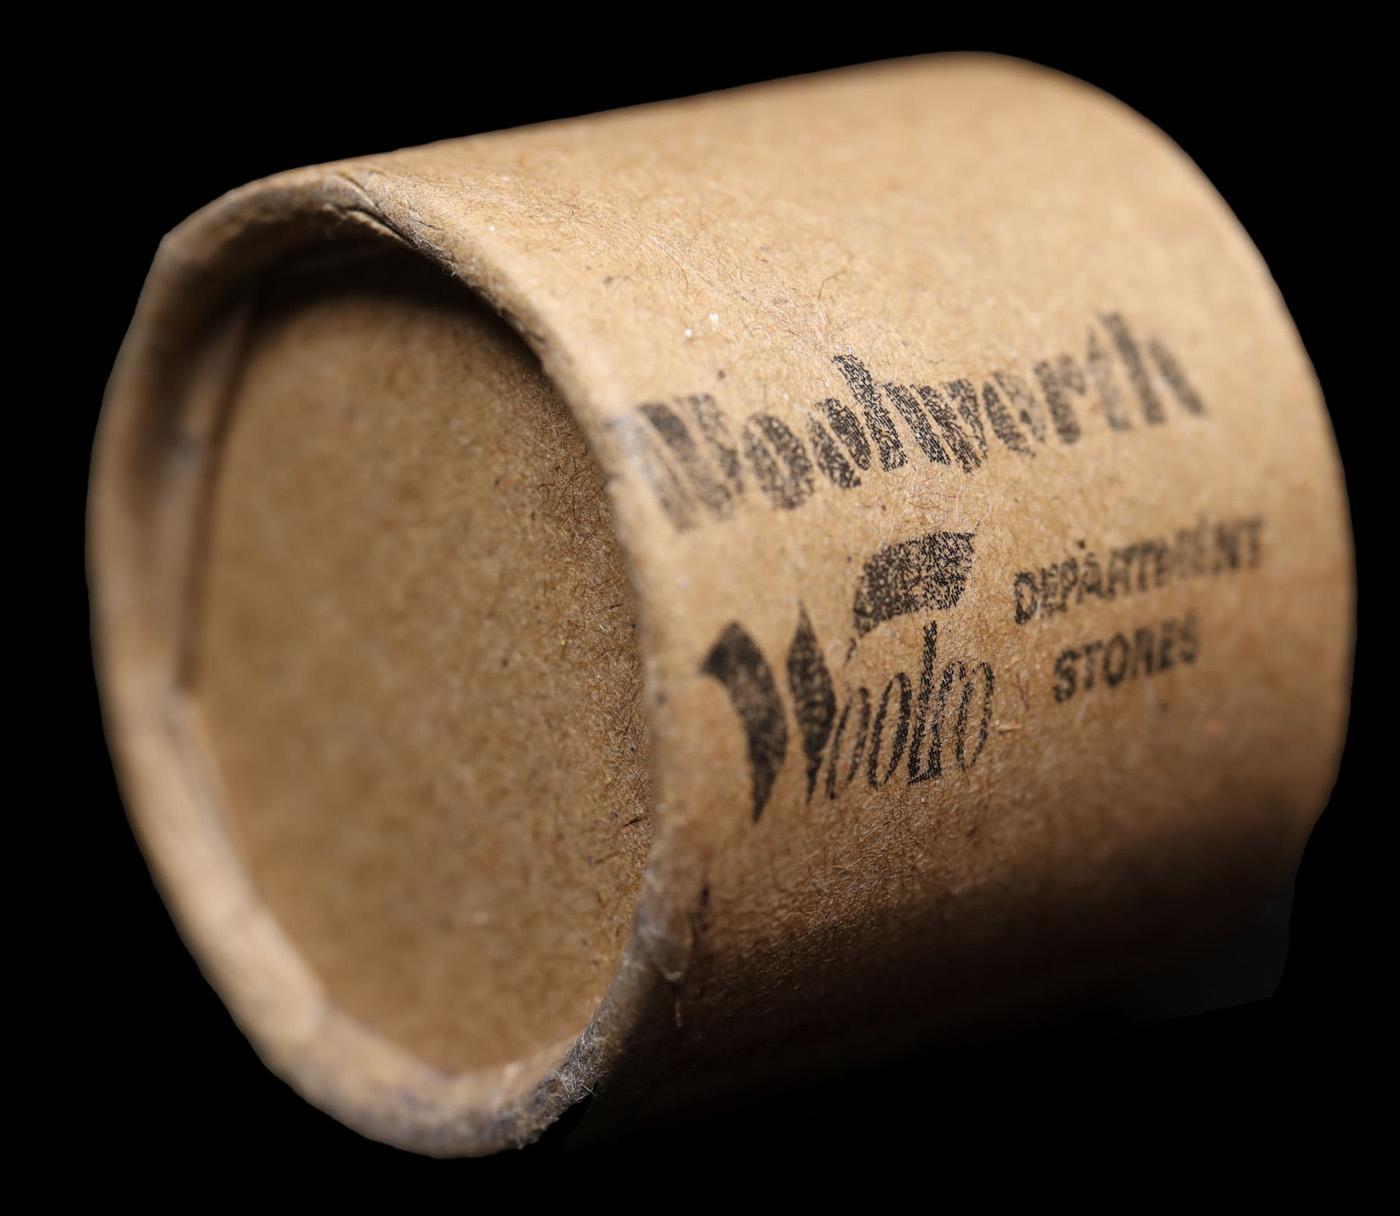 *EXCLUSIVE* x10 Morgan Covered End Roll! Marked "Unc Morgan Limited"! - Huge Vault Hoard  (FC)